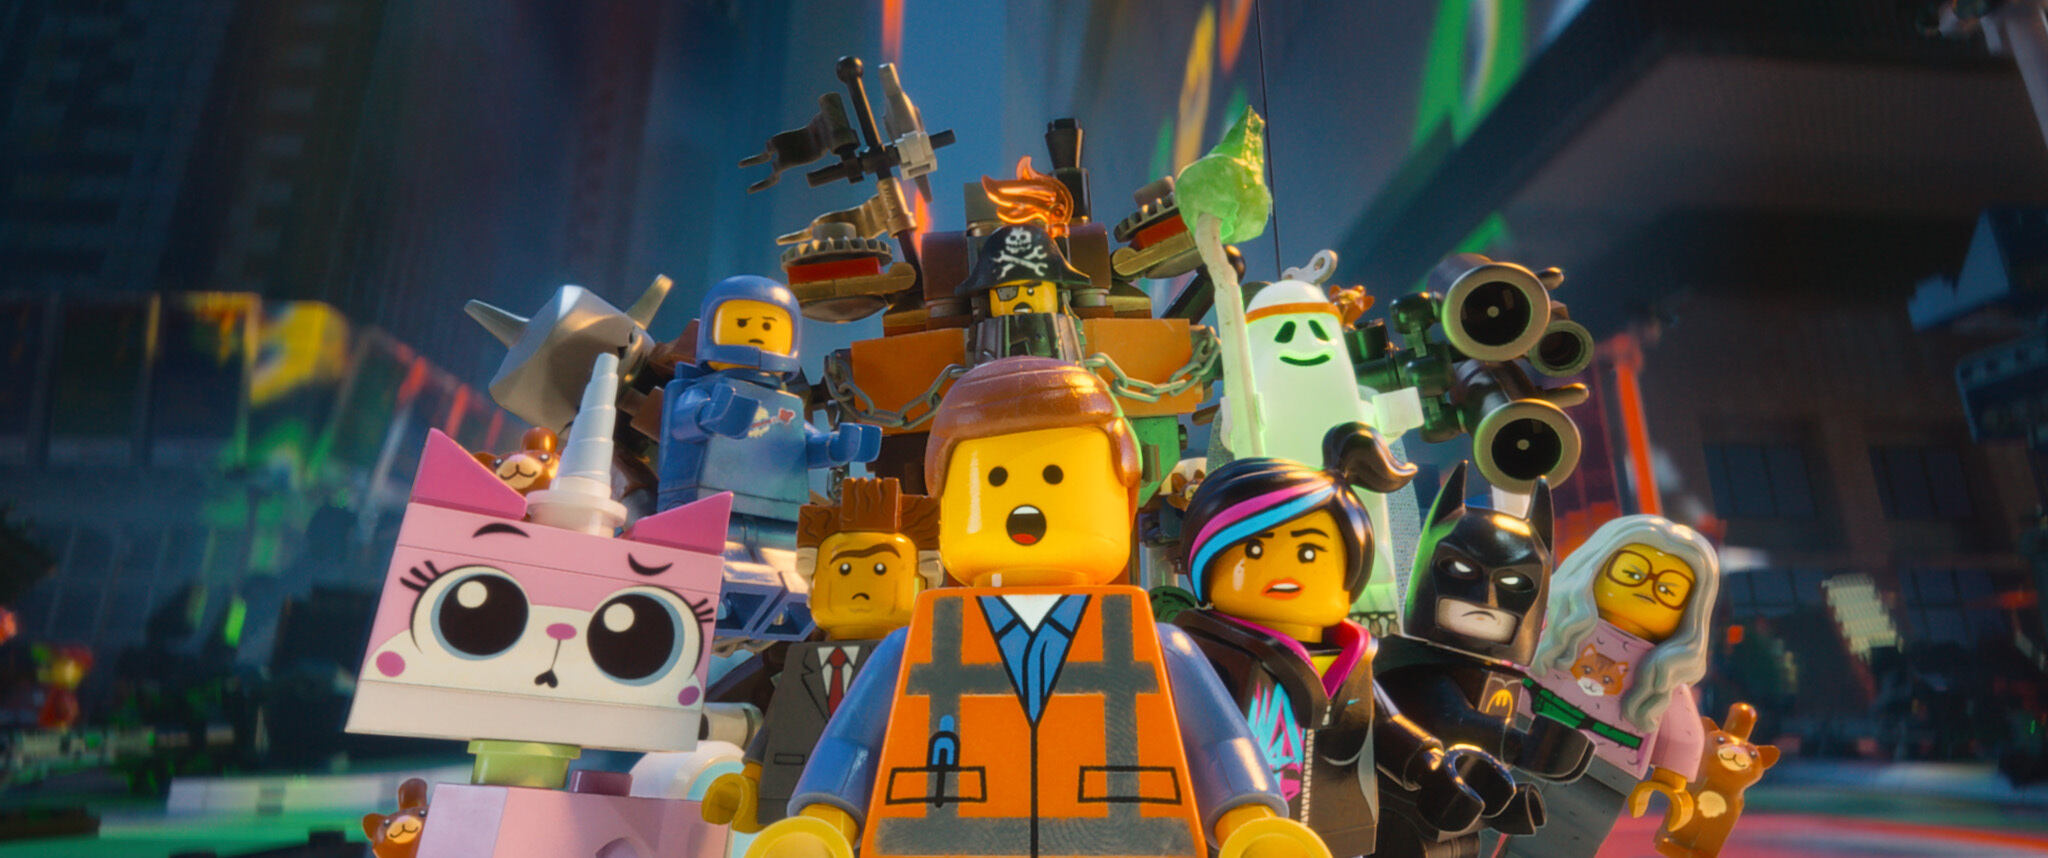 41-facts-about-the-movie-the-lego-movie